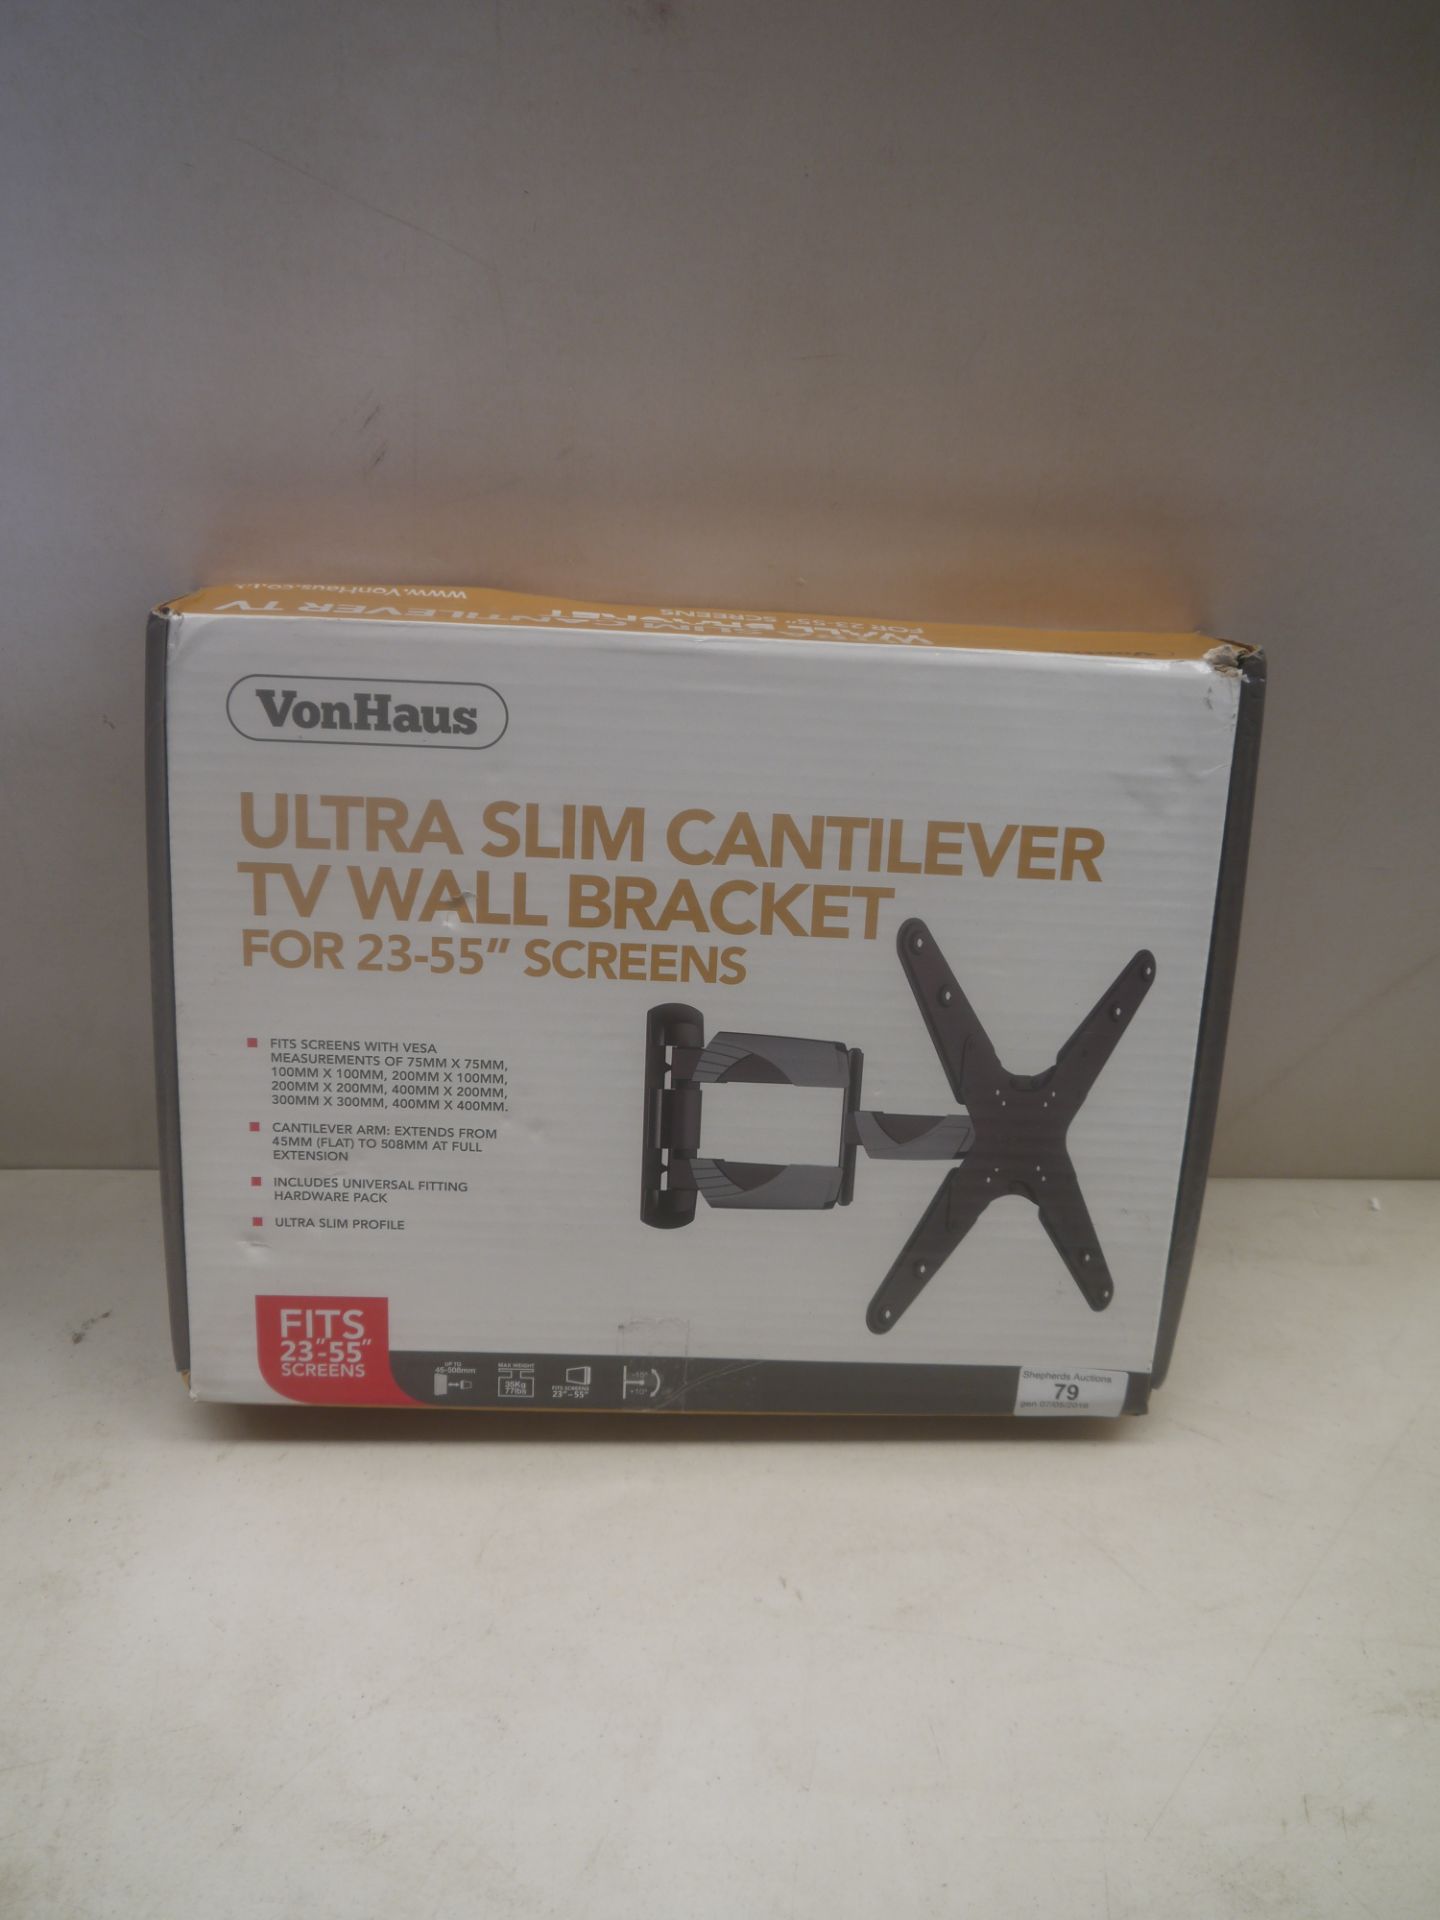 VonHaus Ultra slim cantilever TV wall bracket for 23-55" screen, unchecked and boxed.